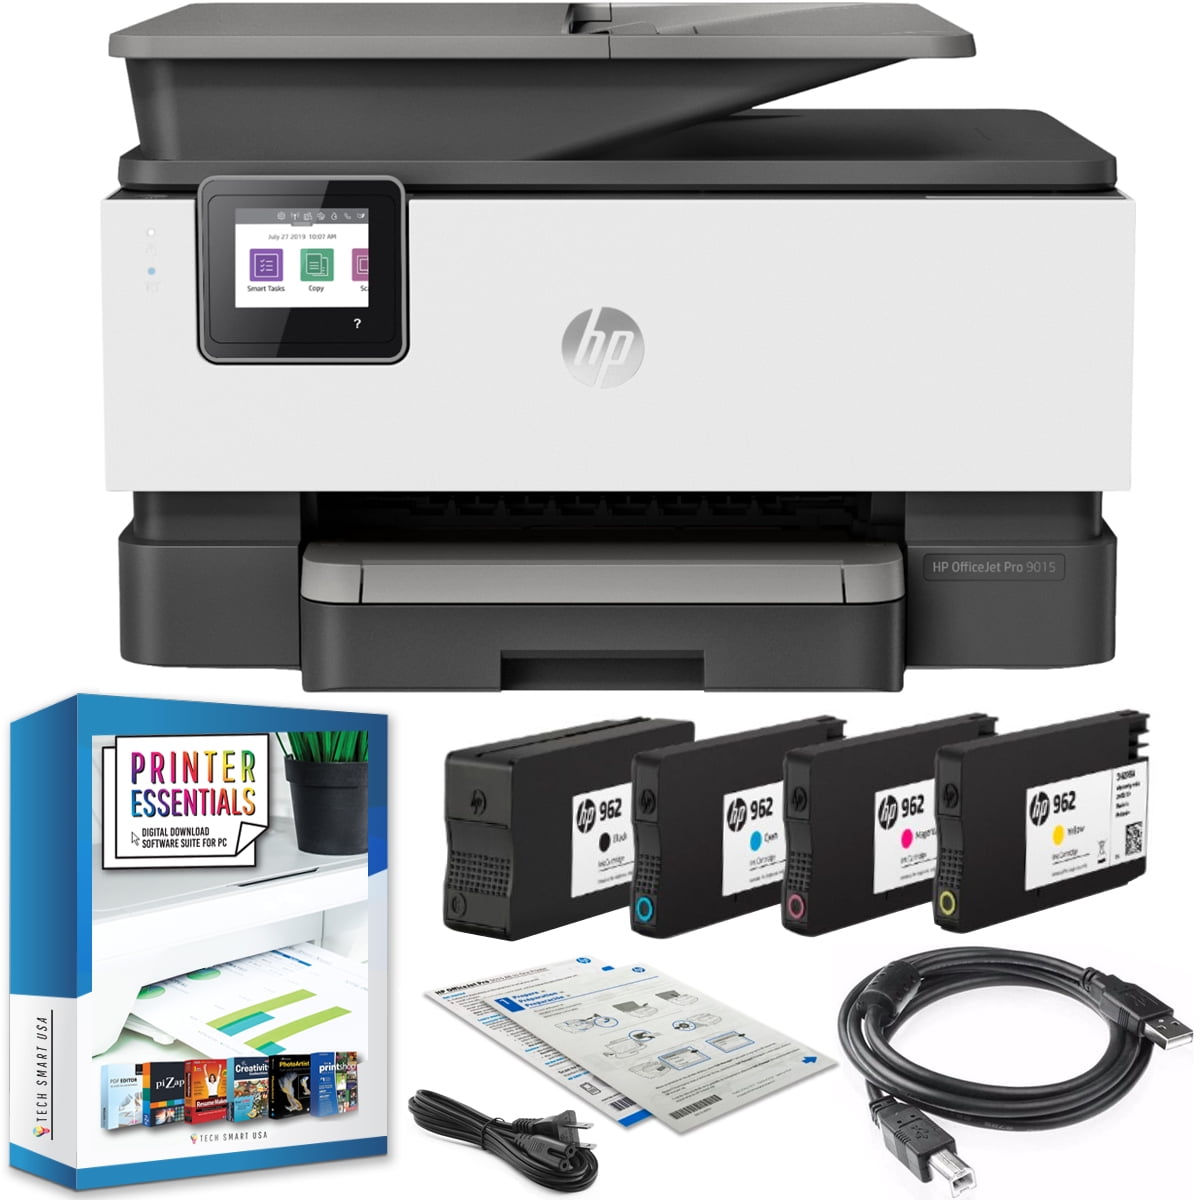 HP OfficeJet Pro 9015 All-in-One Wireless Printer w/ Smart Home Office  Productivity, Instant Ink, Works with Alexa 1KR42A Print, Scan, Copy, Fax